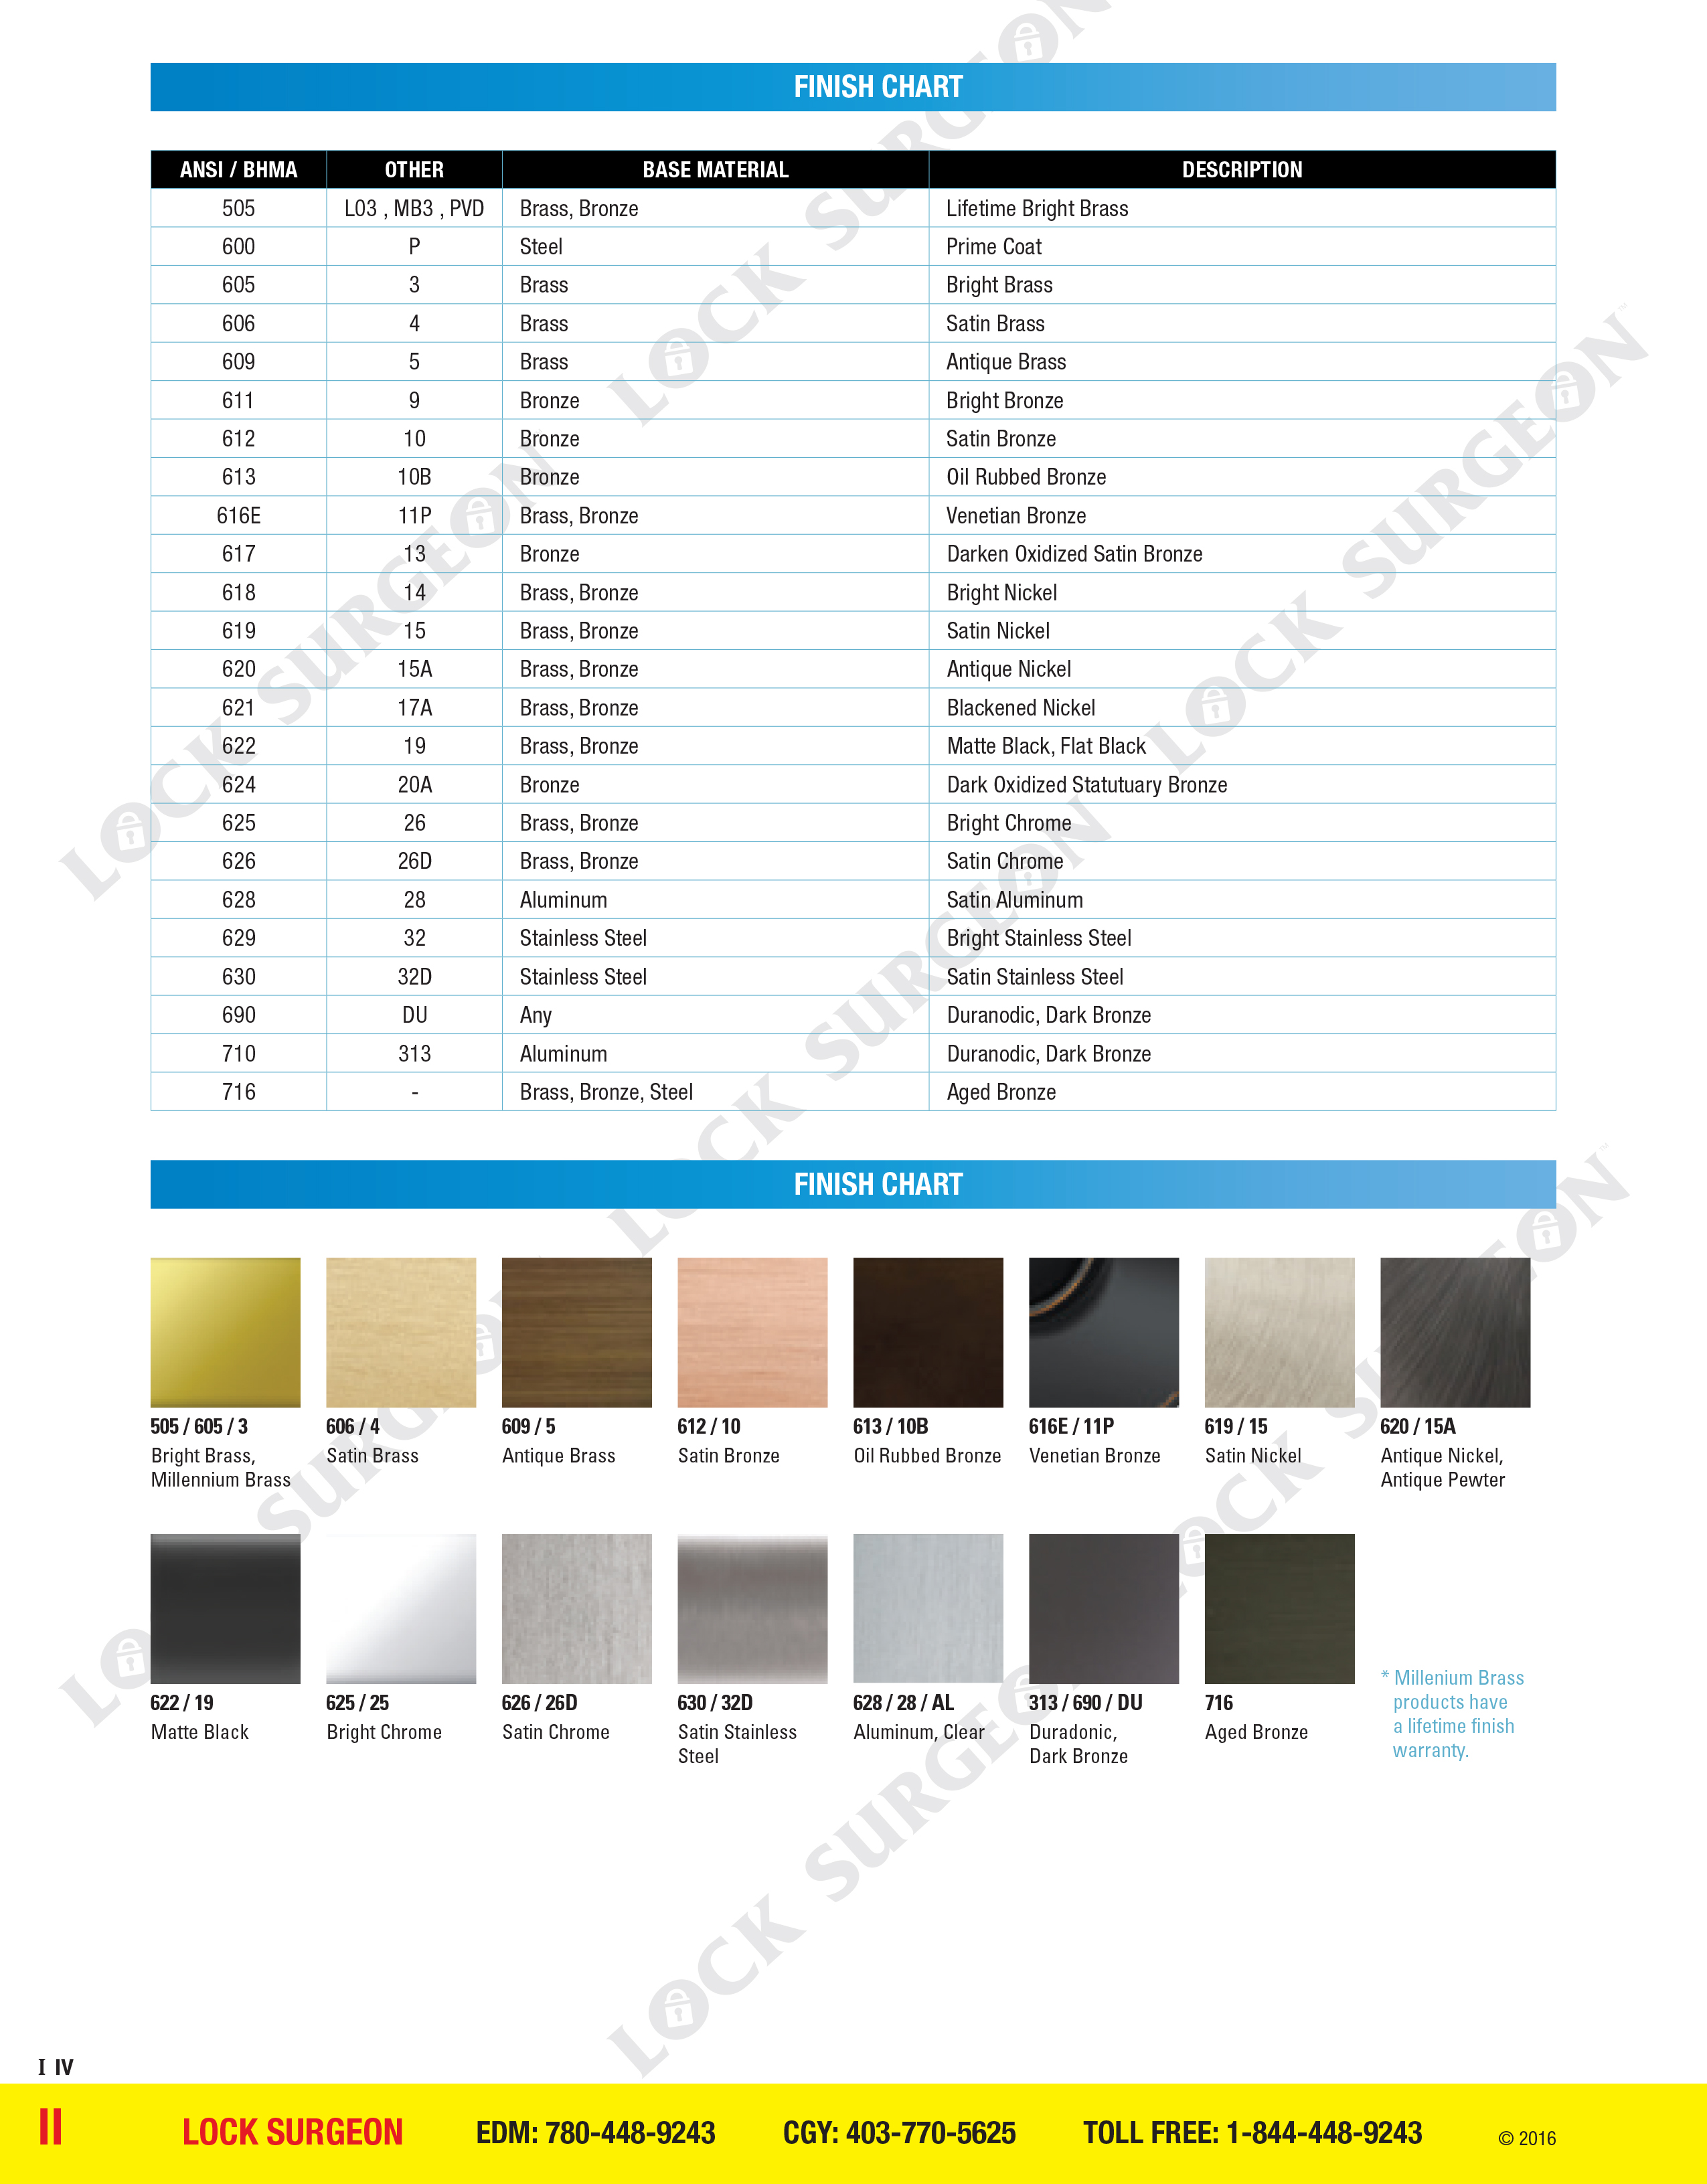 Reference chart for Colour finishes available on a variety of products at Lock Surgeon Calgary.